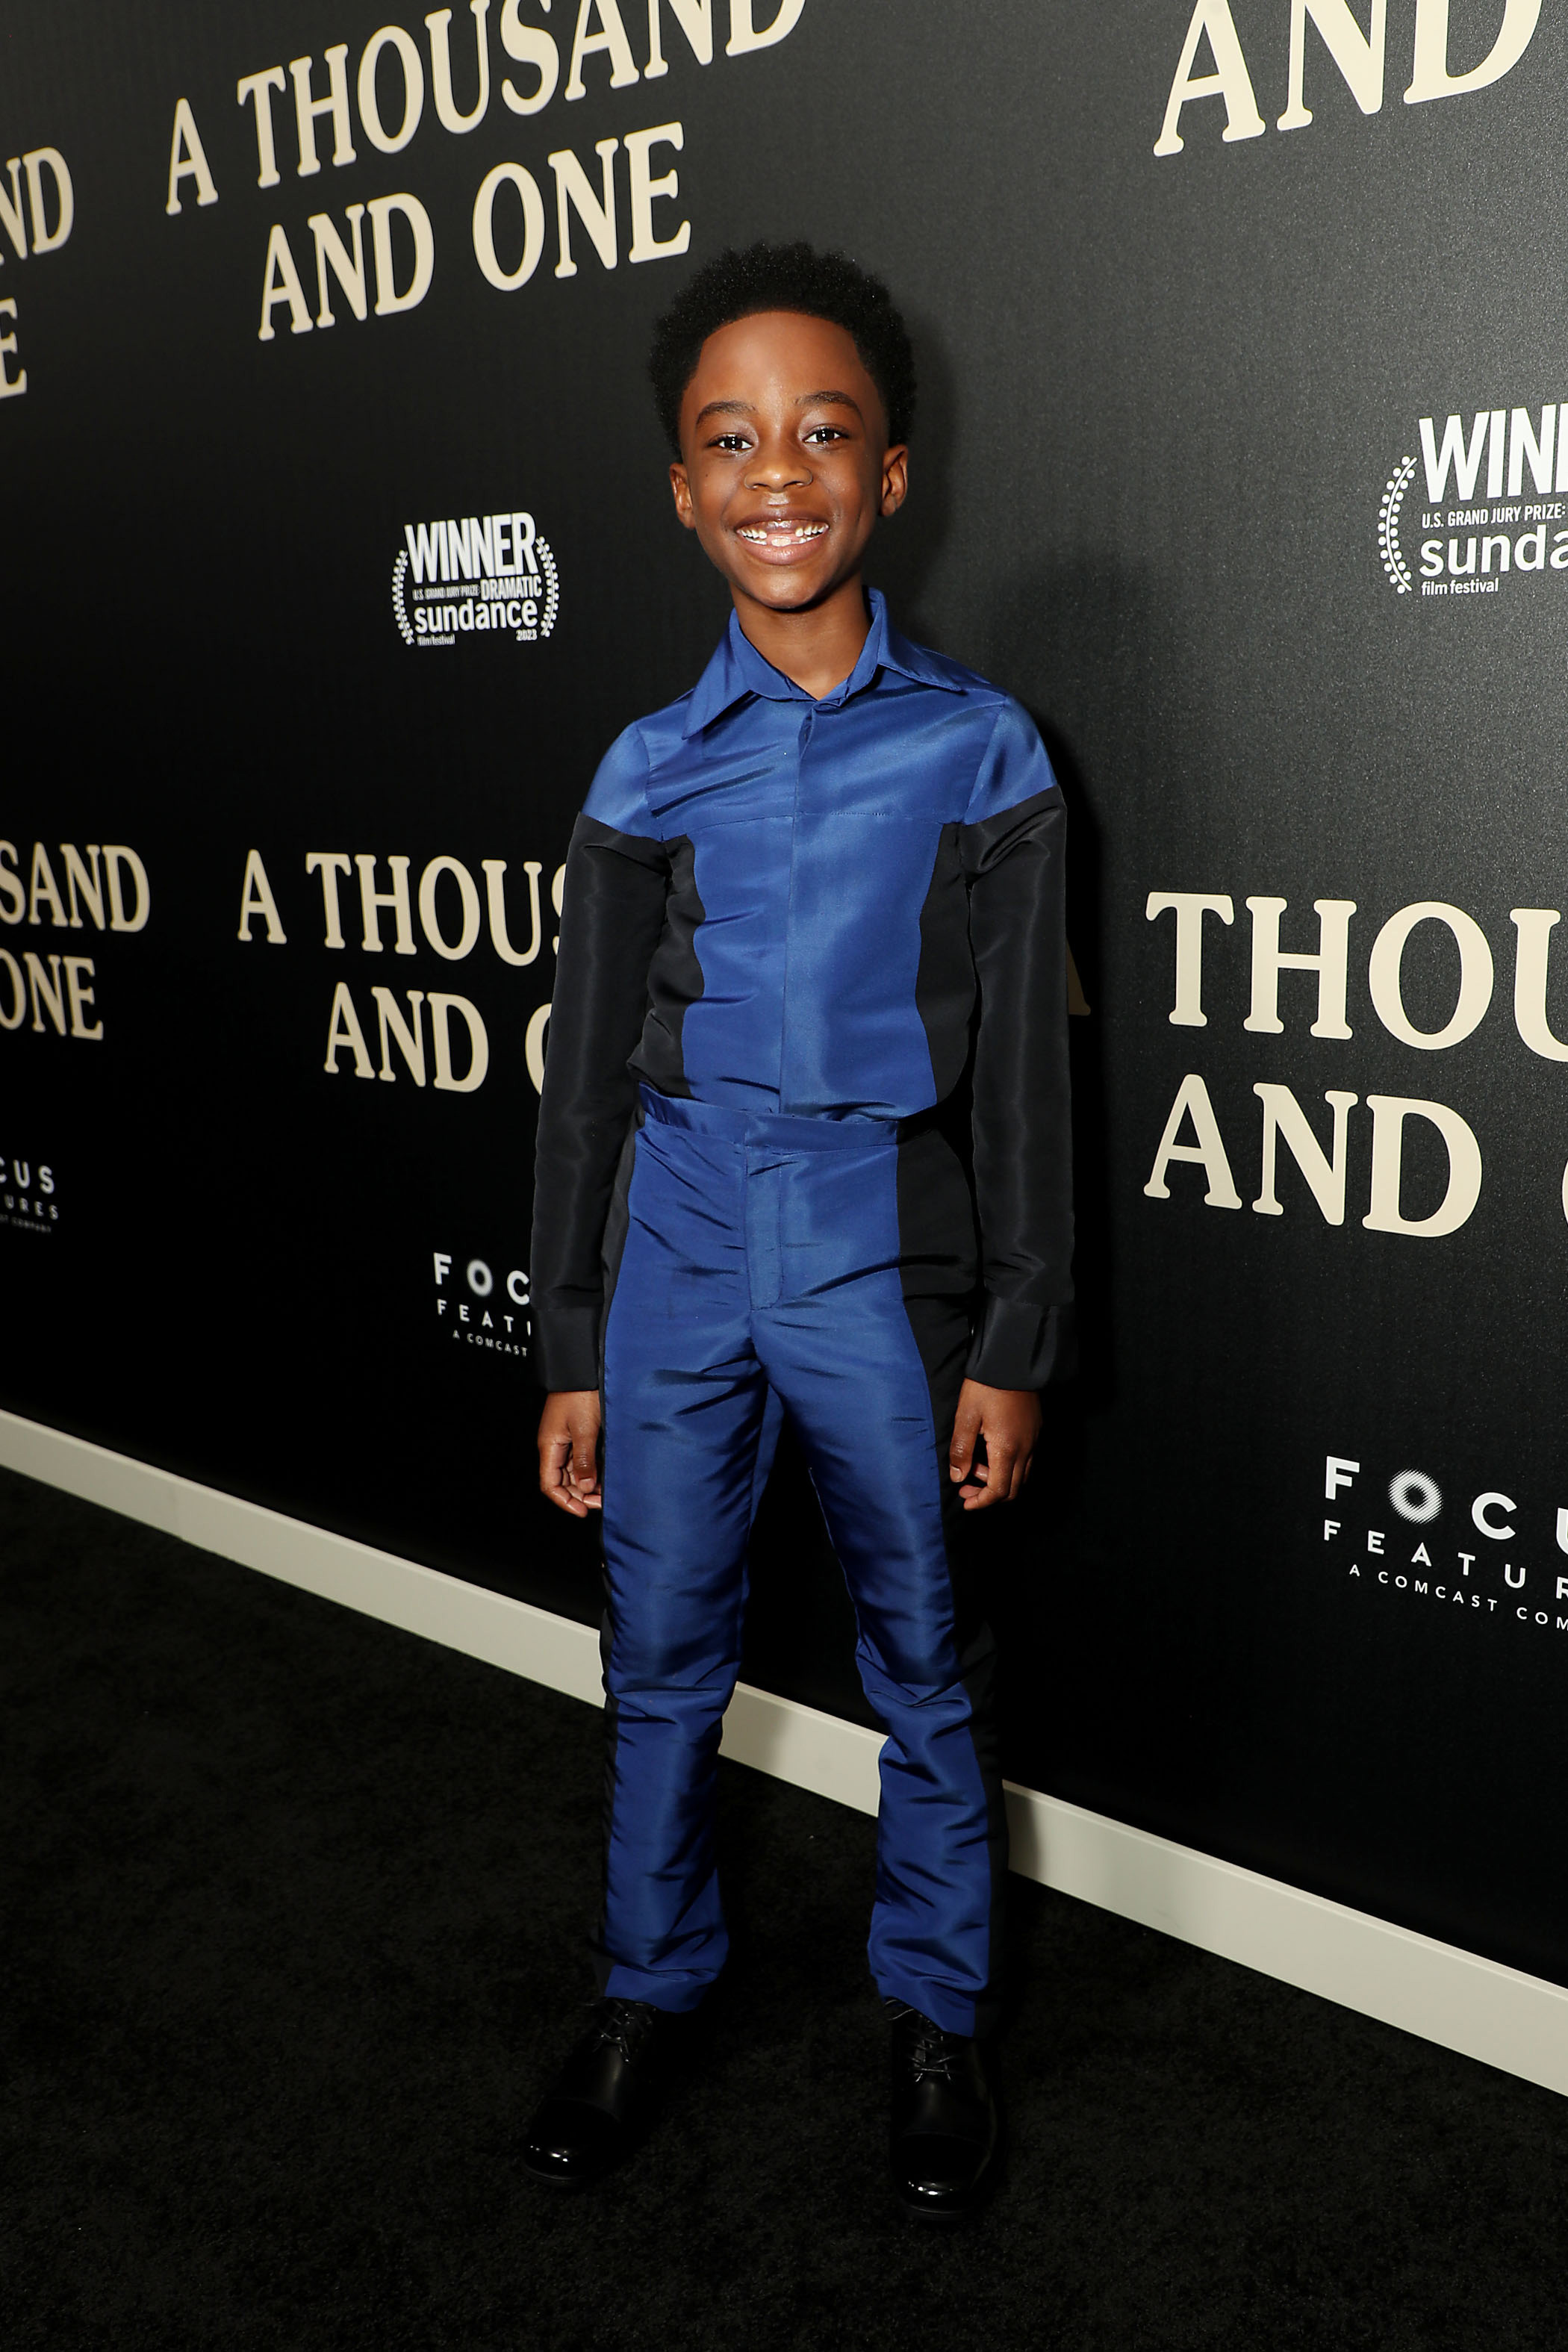 A Thousand And One Red Carpet Premiere Takes Harlem